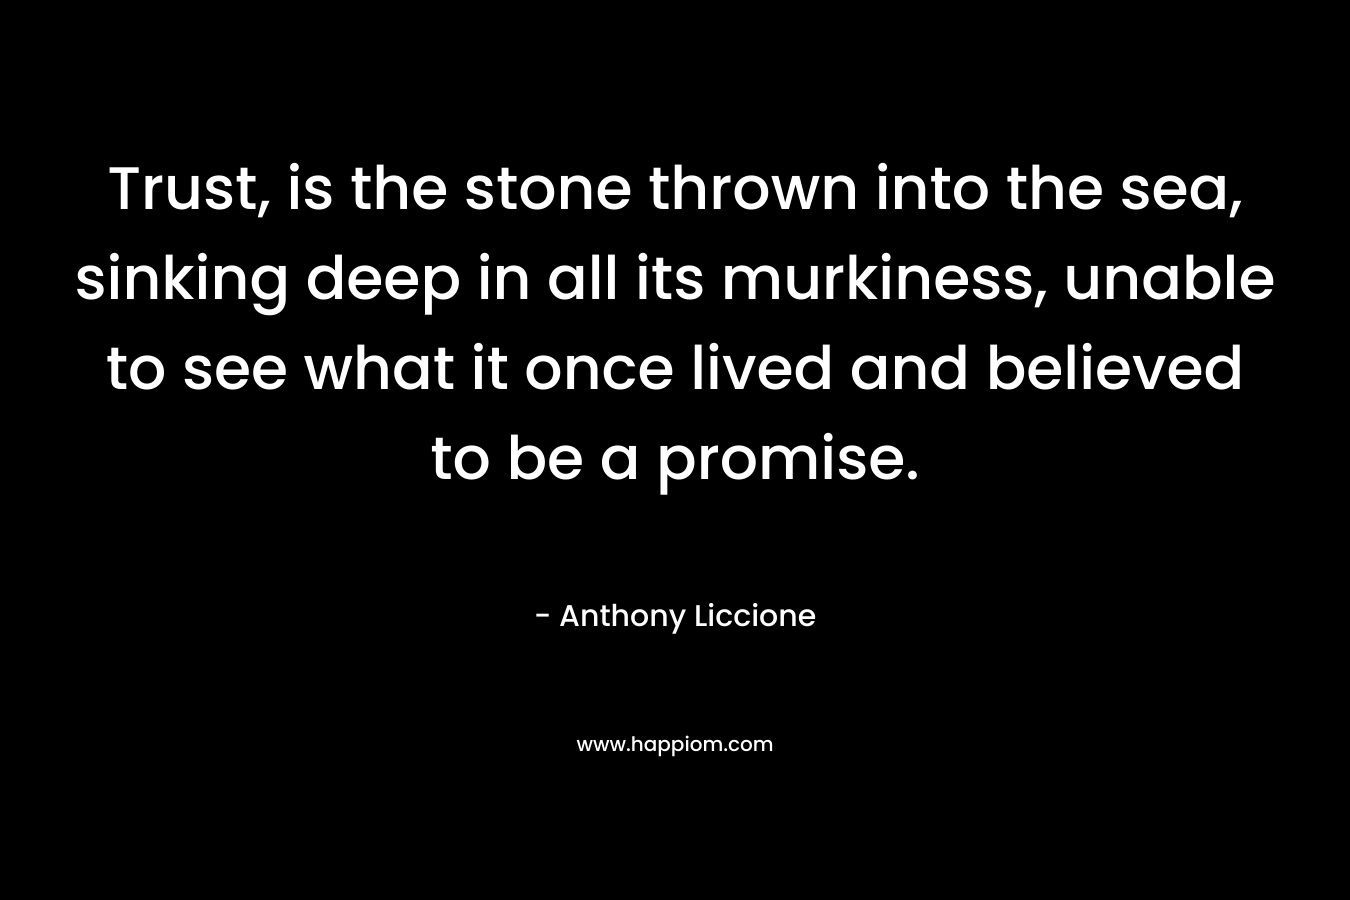 Trust, is the stone thrown into the sea, sinking deep in all its murkiness, unable to see what it once lived and believed to be a promise. – Anthony Liccione